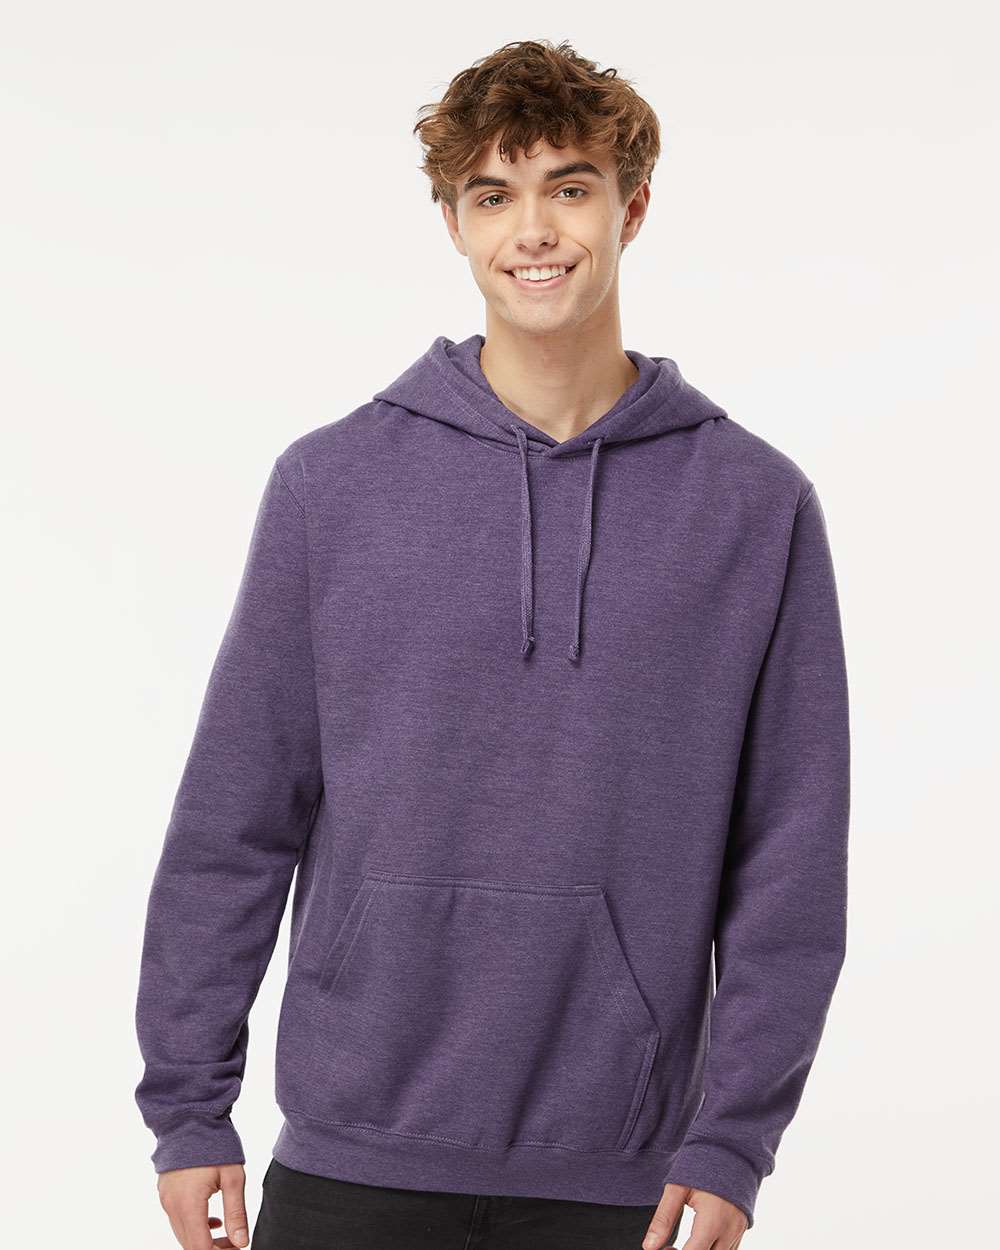 M&O Unisex Pullover Hoodie 3320 #colormdl_Heather Purple